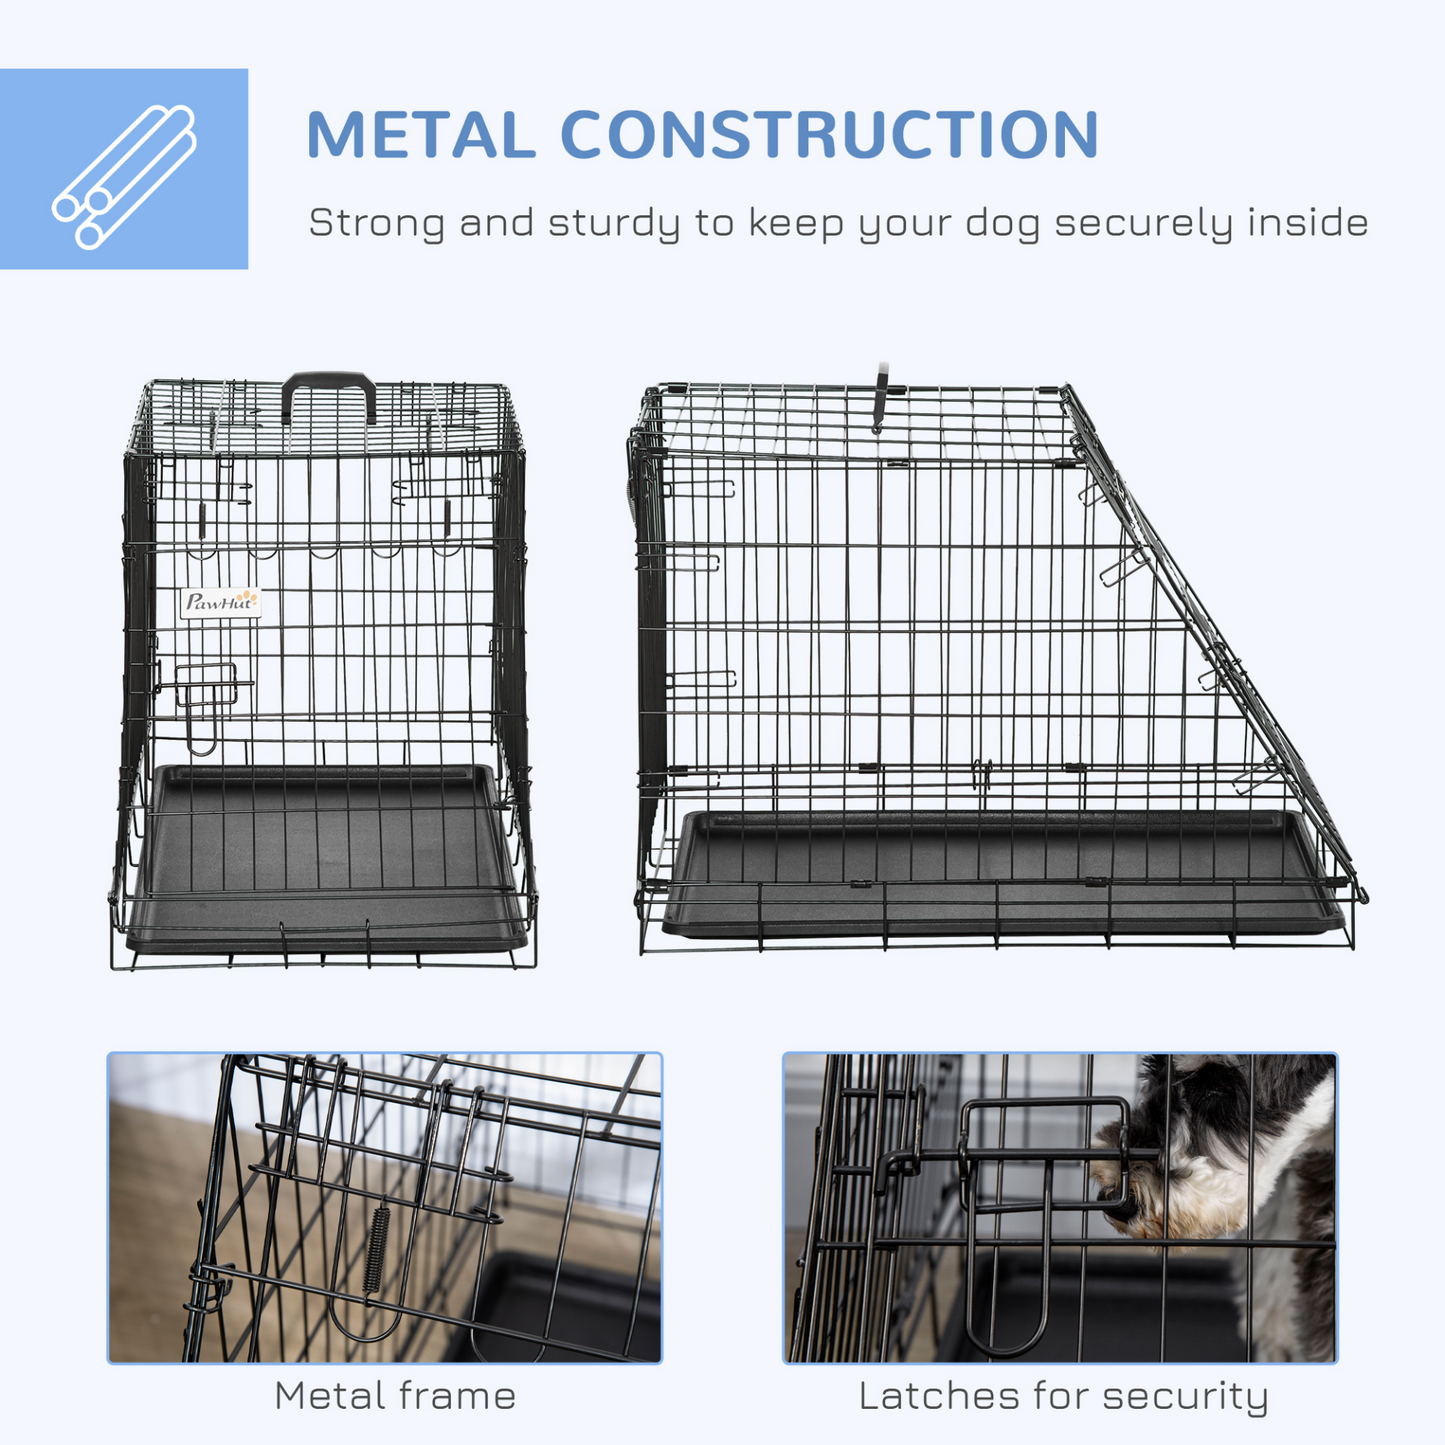 PawHut Metal Dog Car Crate Folding Pet Cage Transport Box Carrier for Small Dog with Removable Tray 77 x 47 x 55cm